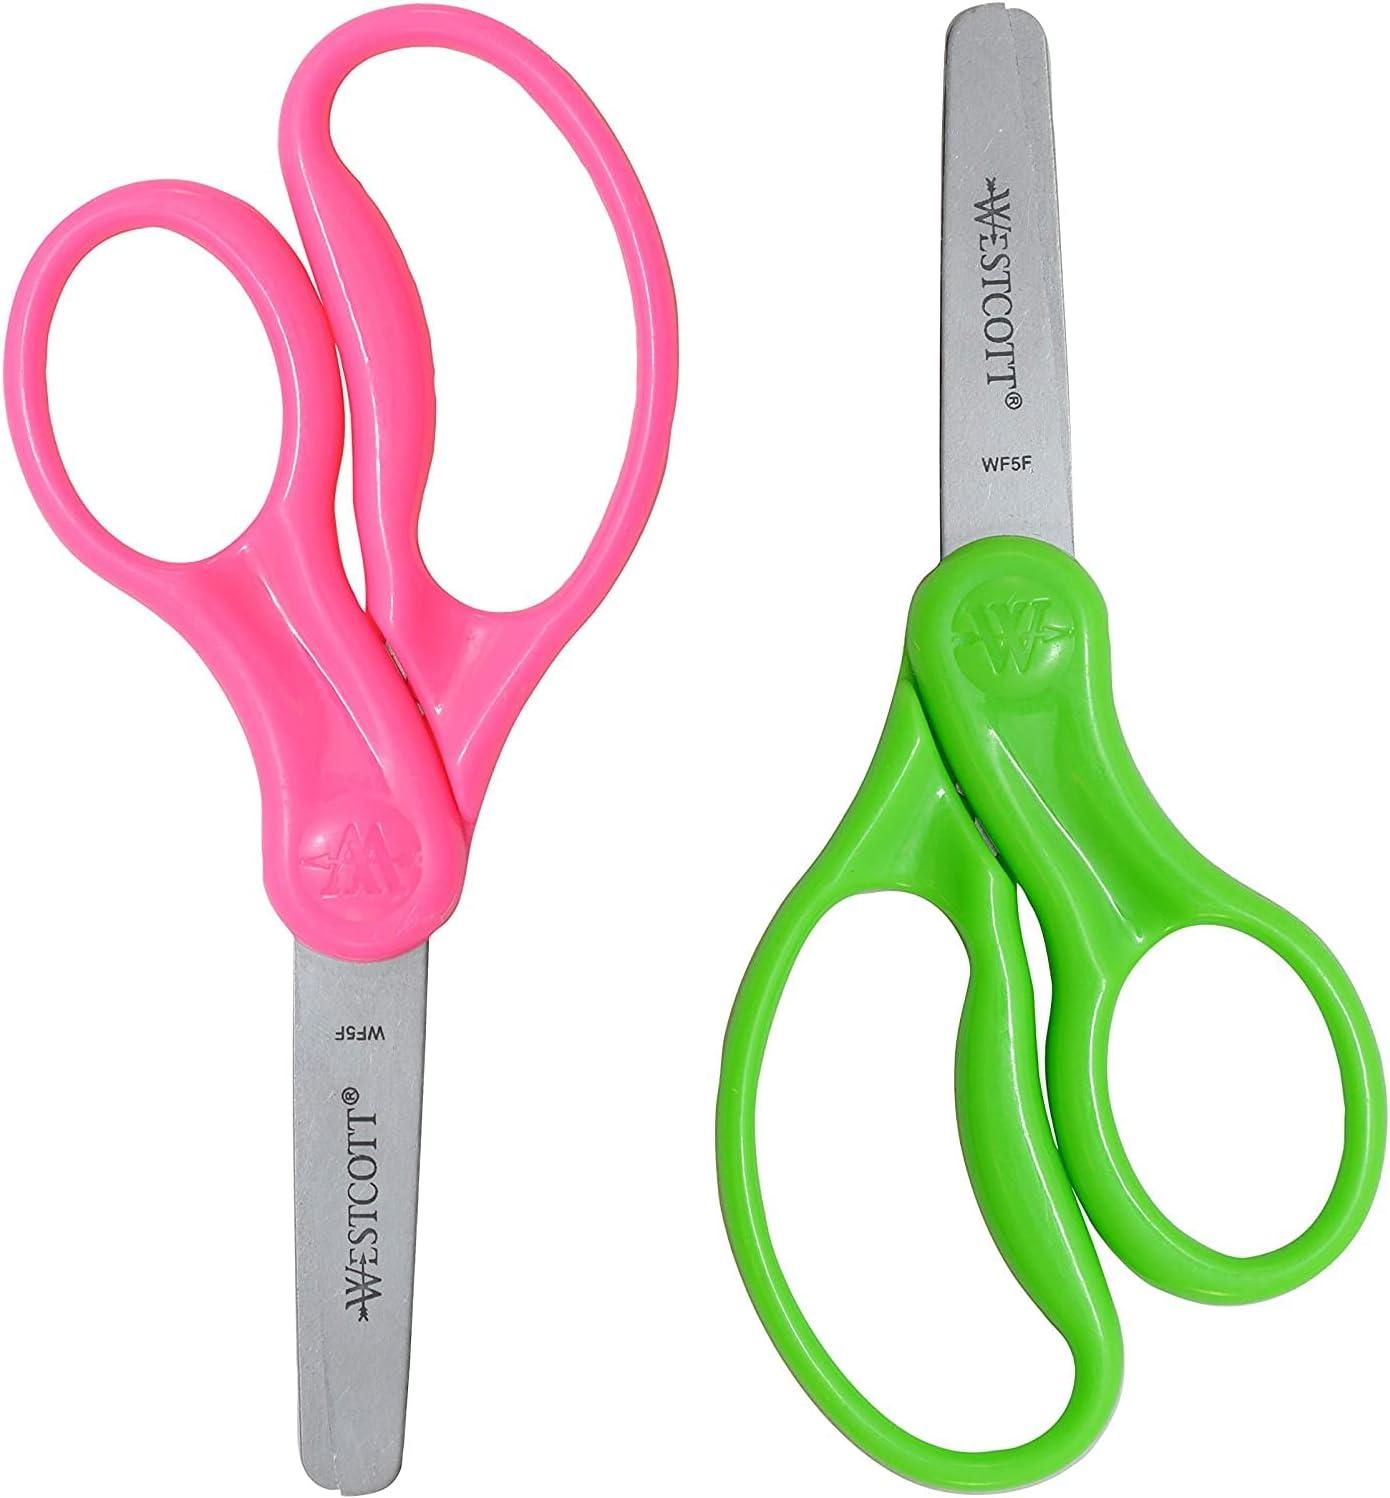 Westcott 55843 Right- and Left-Handed Scissors, Kids' Scissors, Ages 4-8,  5-Inch Blunt Tip, 3 Pack